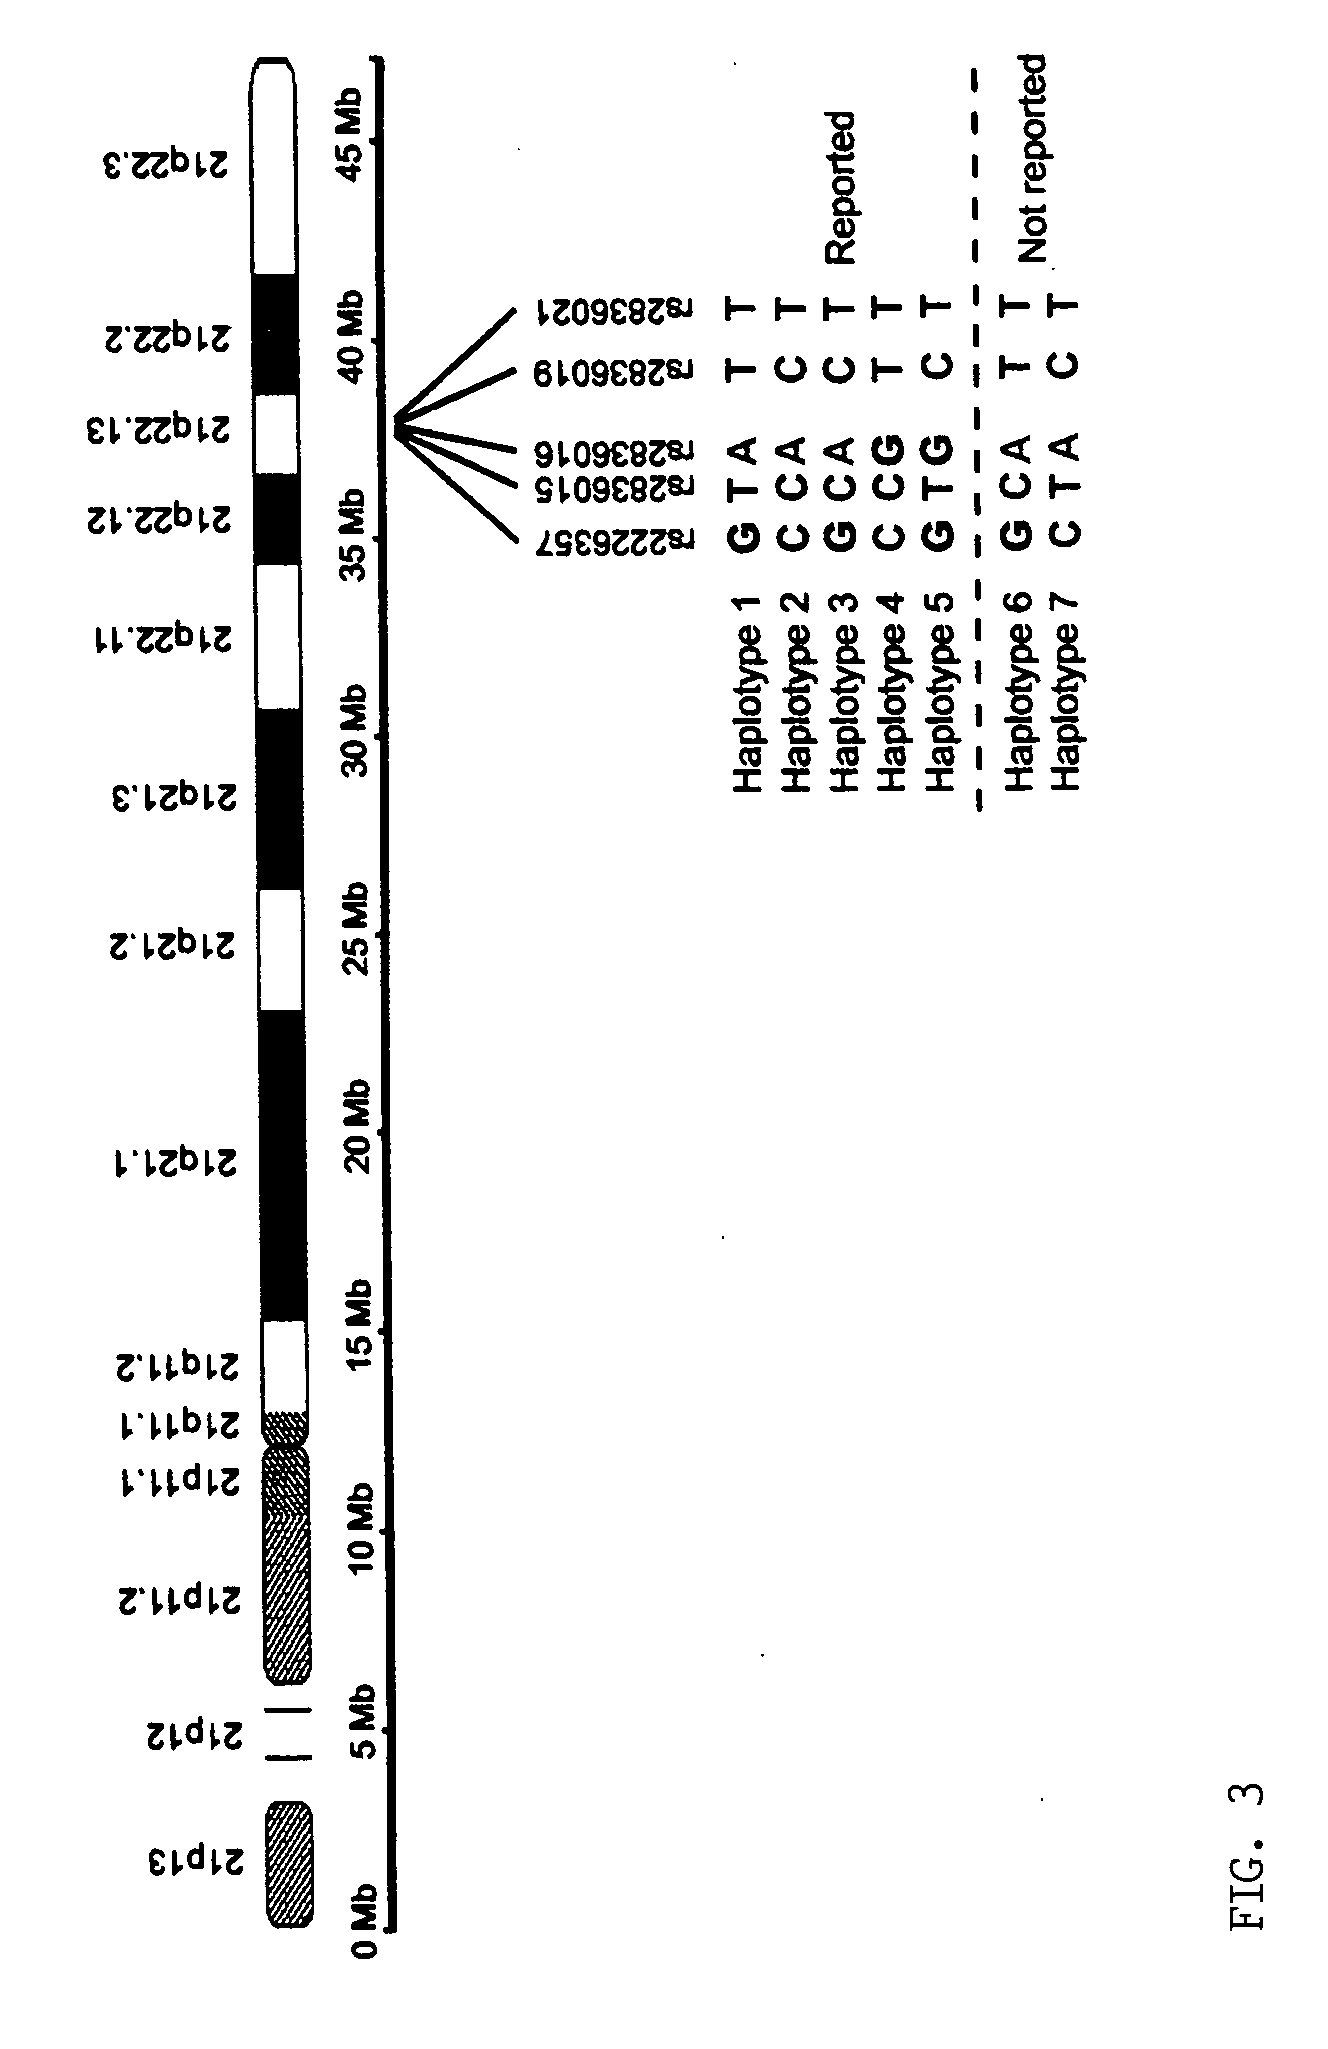 Microdissection-based methods for determining genomic features of single chromosomes